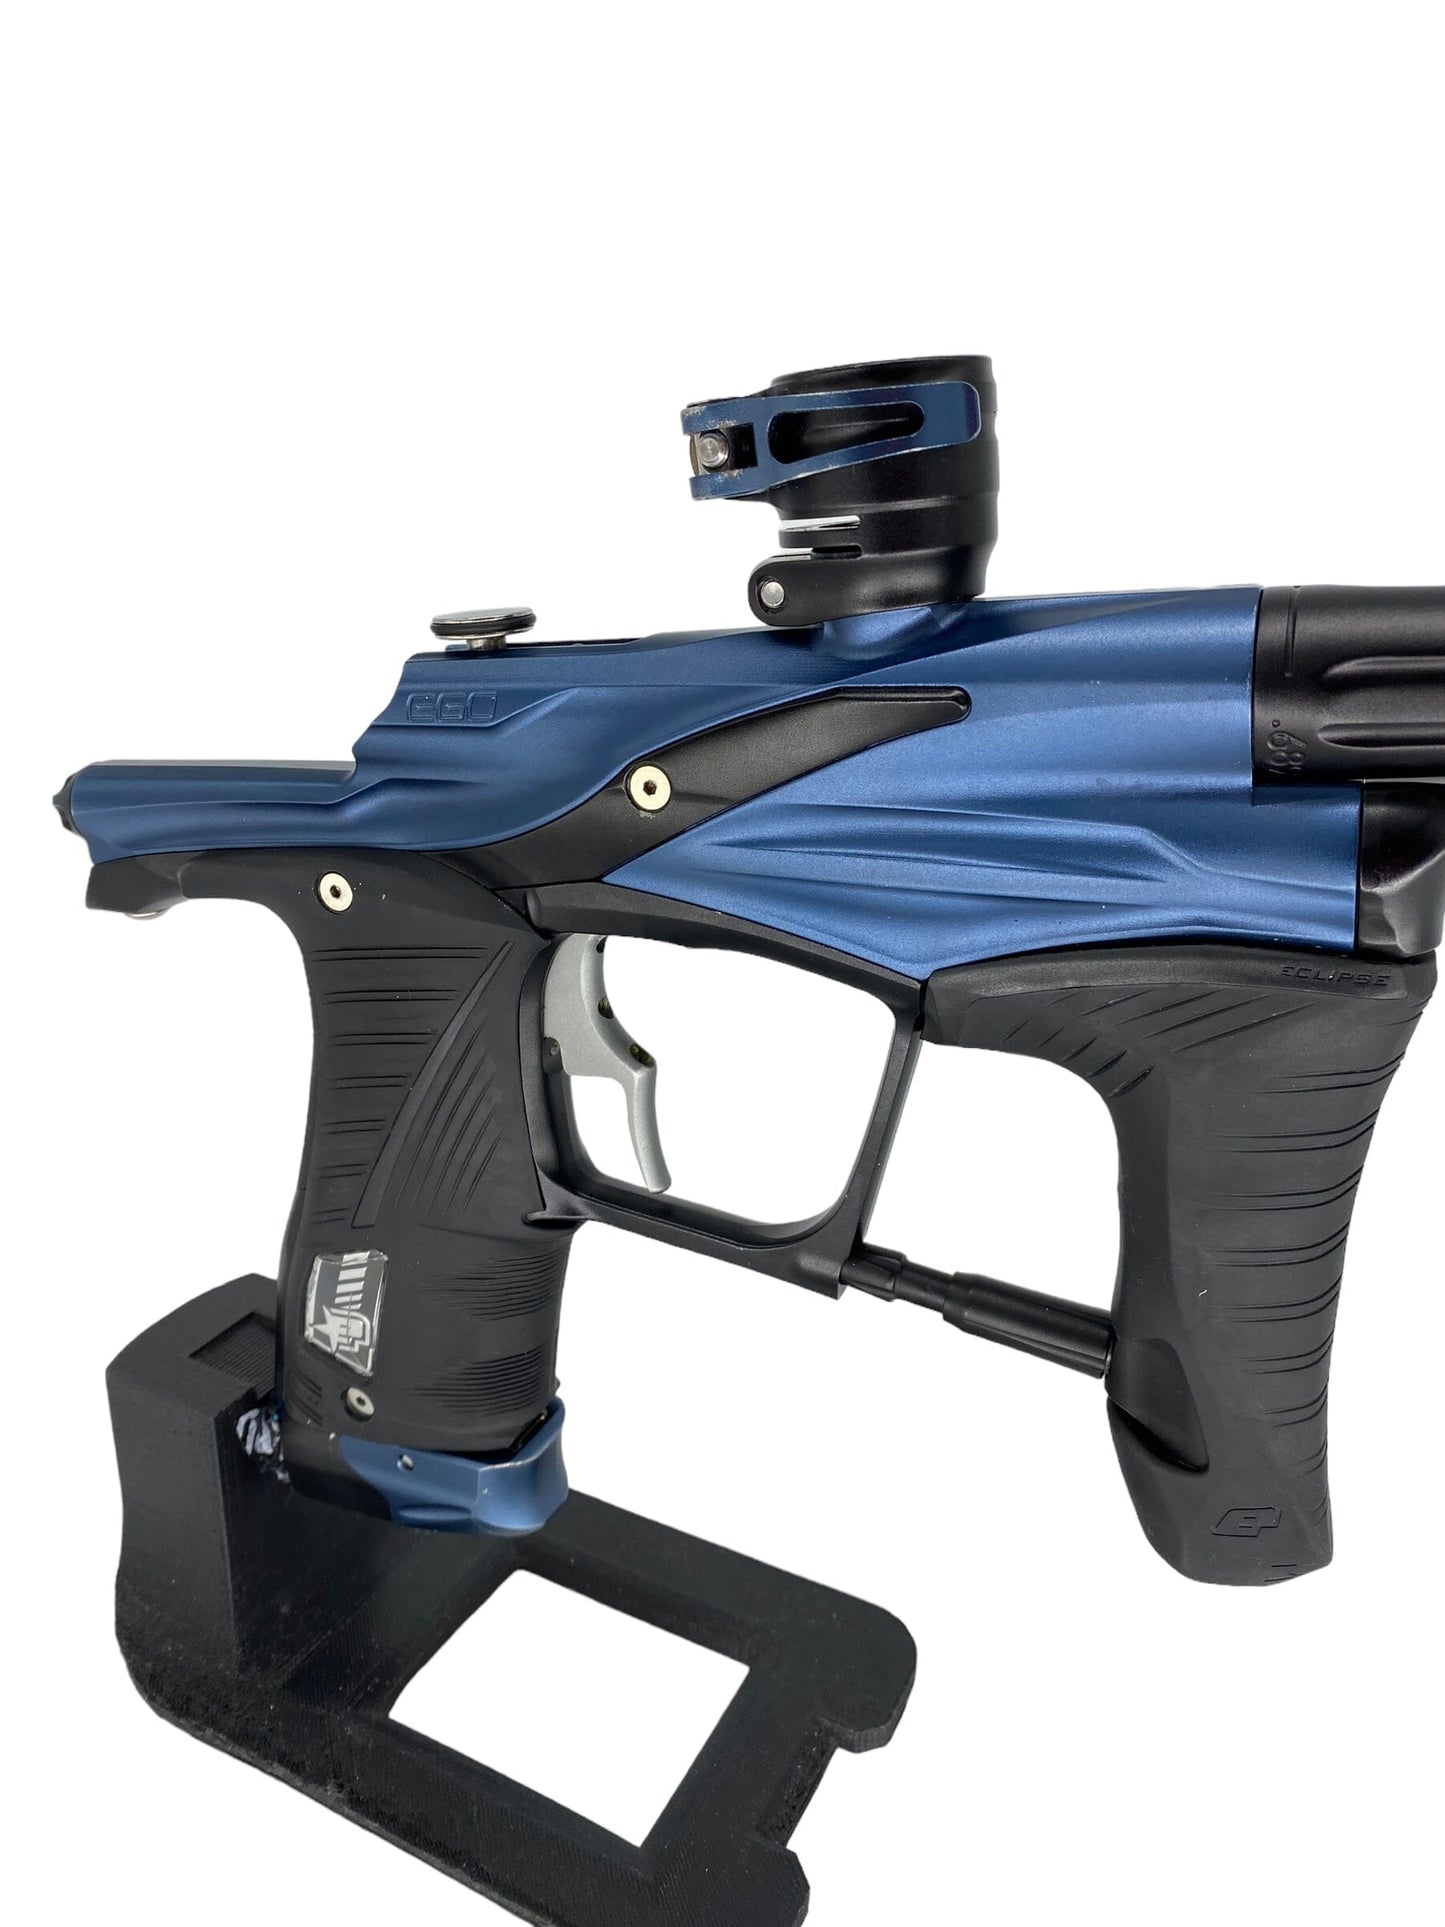 Used Planet Eclipse Lv1 Paintball Gun Paintball Gun from CPXBrosPaintball Buy/Sell/Trade Paintball Markers, New Paintball Guns, Paintball Hoppers, Paintball Masks, and Hormesis Headbands